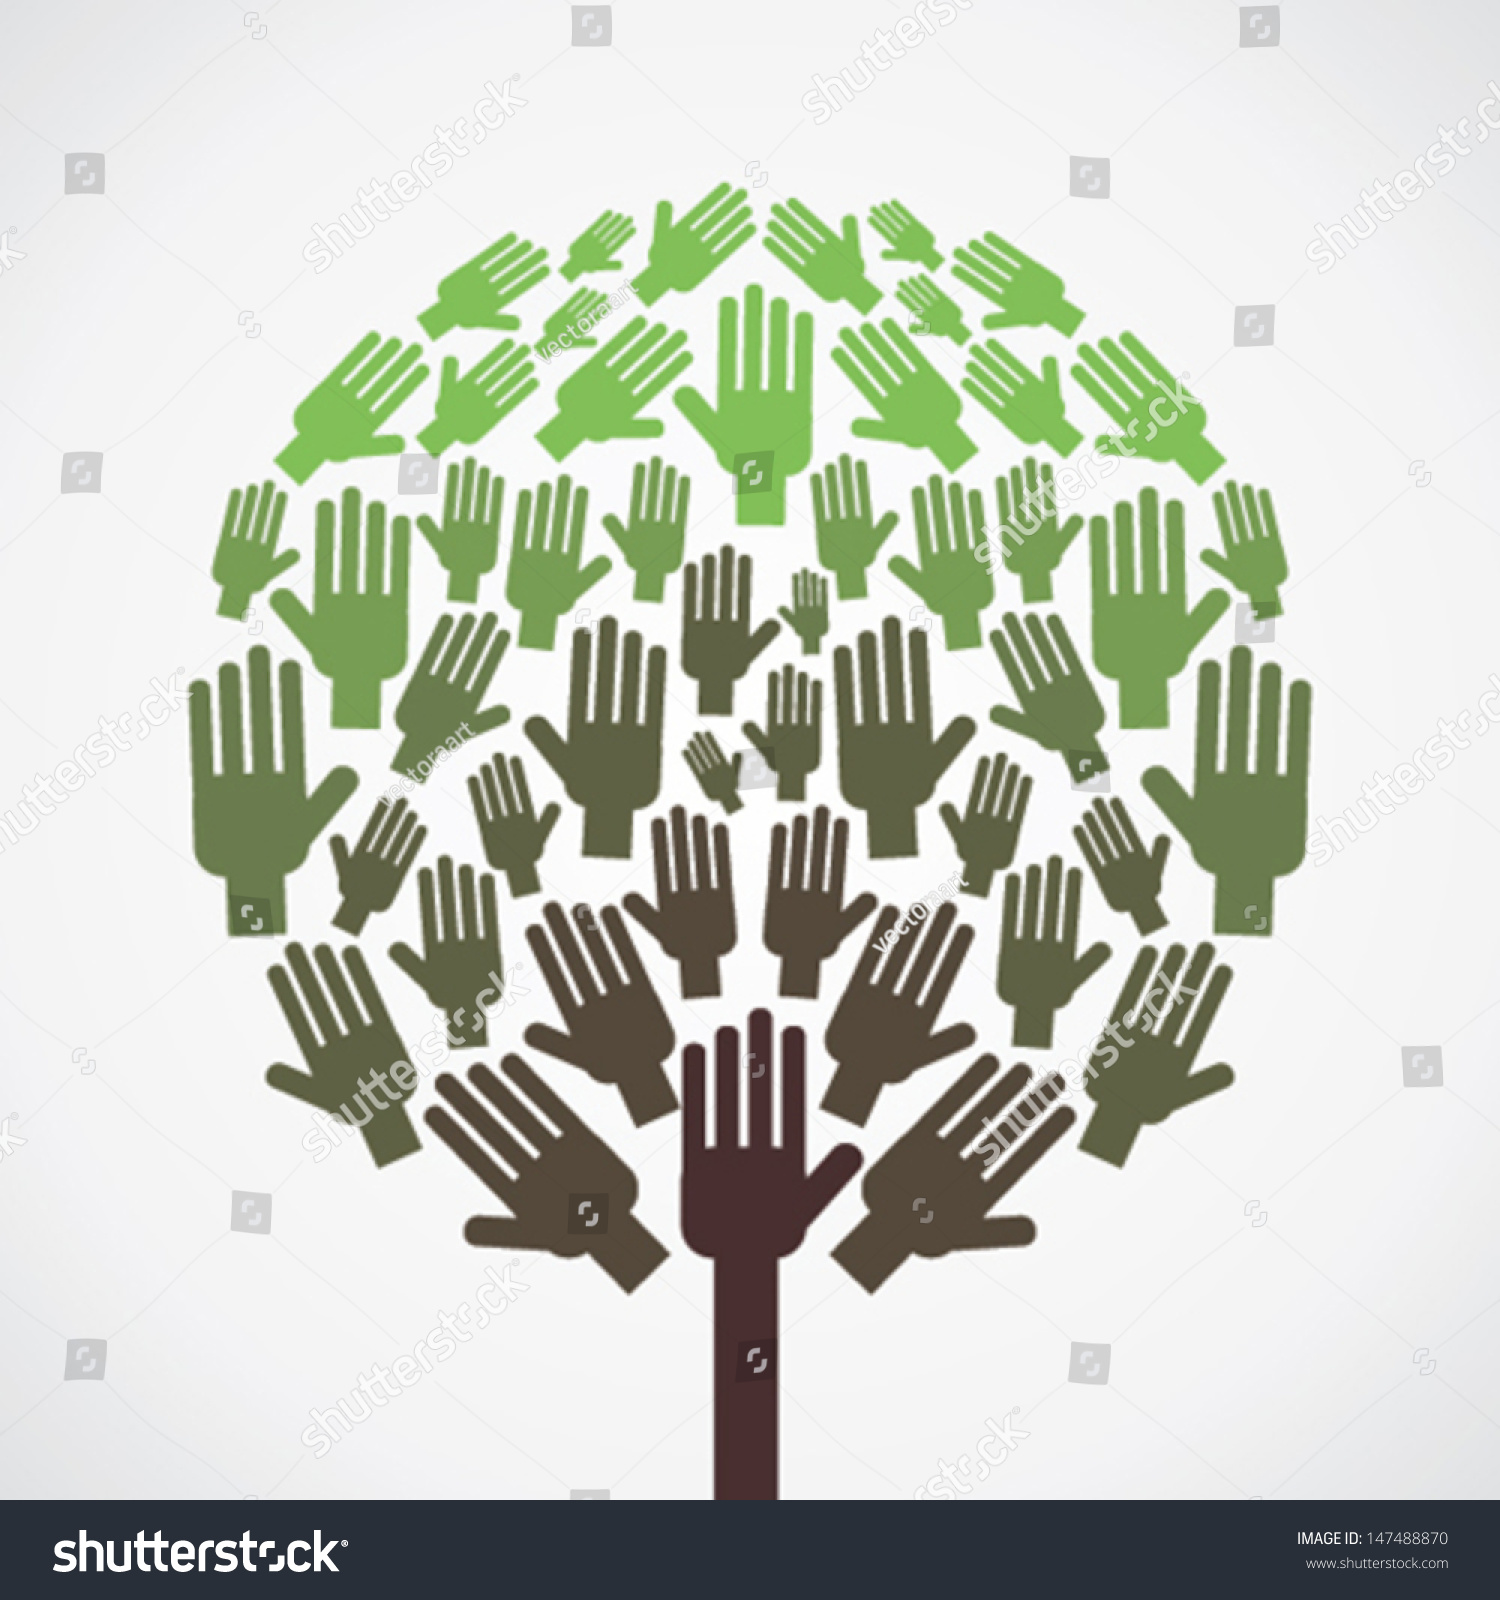 Abstract Hand Tree Show Unity Concept Vector - 147488870 : Shutterstock